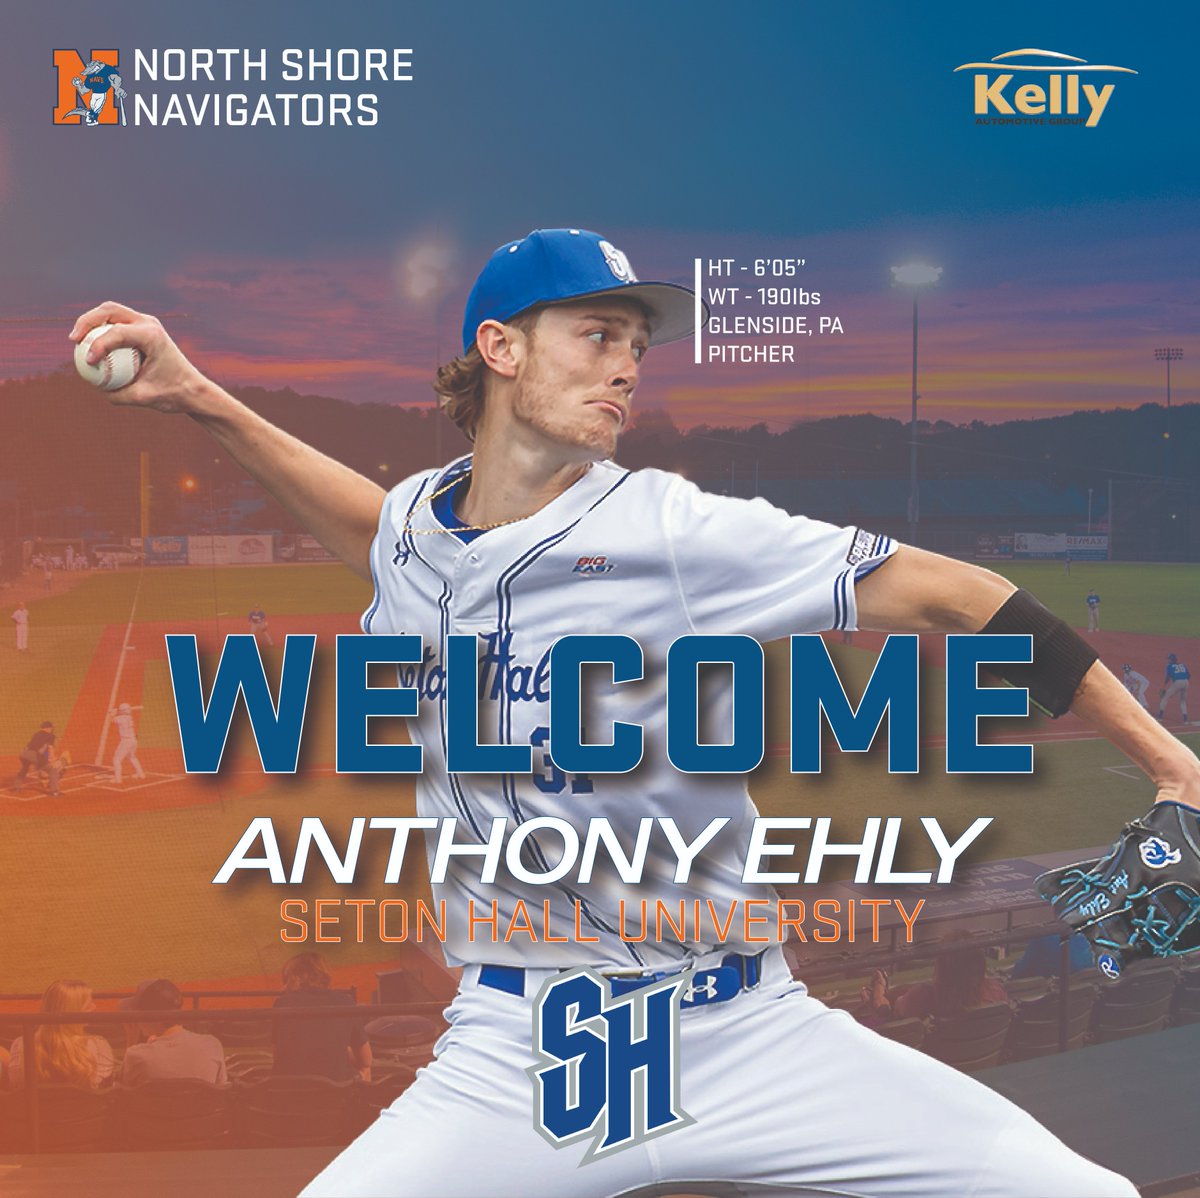 🤝 𝐌𝐄𝐄𝐓 𝐓𝐇𝐄 ‘𝟐𝟒 𝐍𝐀𝐕𝐒 ⚾️ It's our first of three #NavsNation newcomers from a familiar place! Leading off our @SHUBaseball group is pitcher Anthony Ehly, who has 27 K's in 31.1 innings as a sophomore. The righty has pitched in 11 games, starting four.